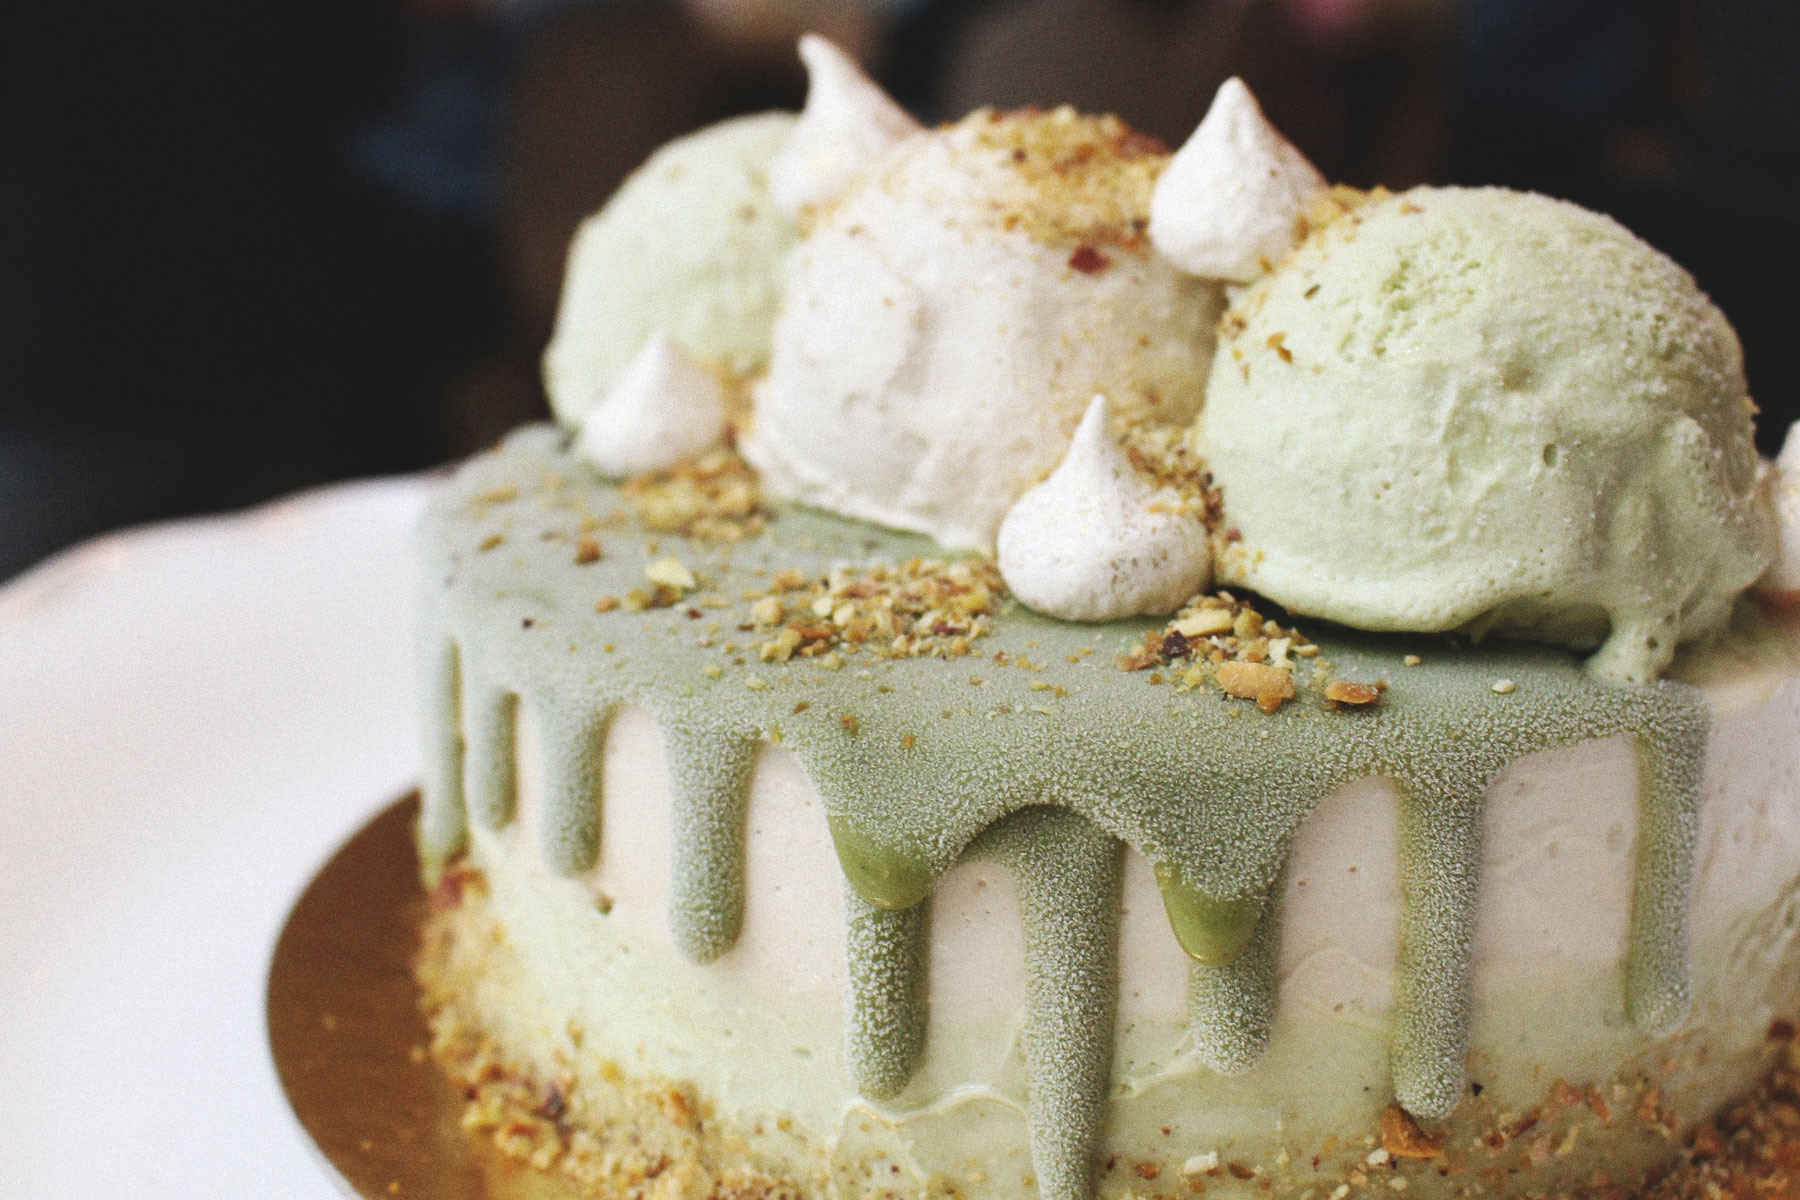 gelato cake with green frosting